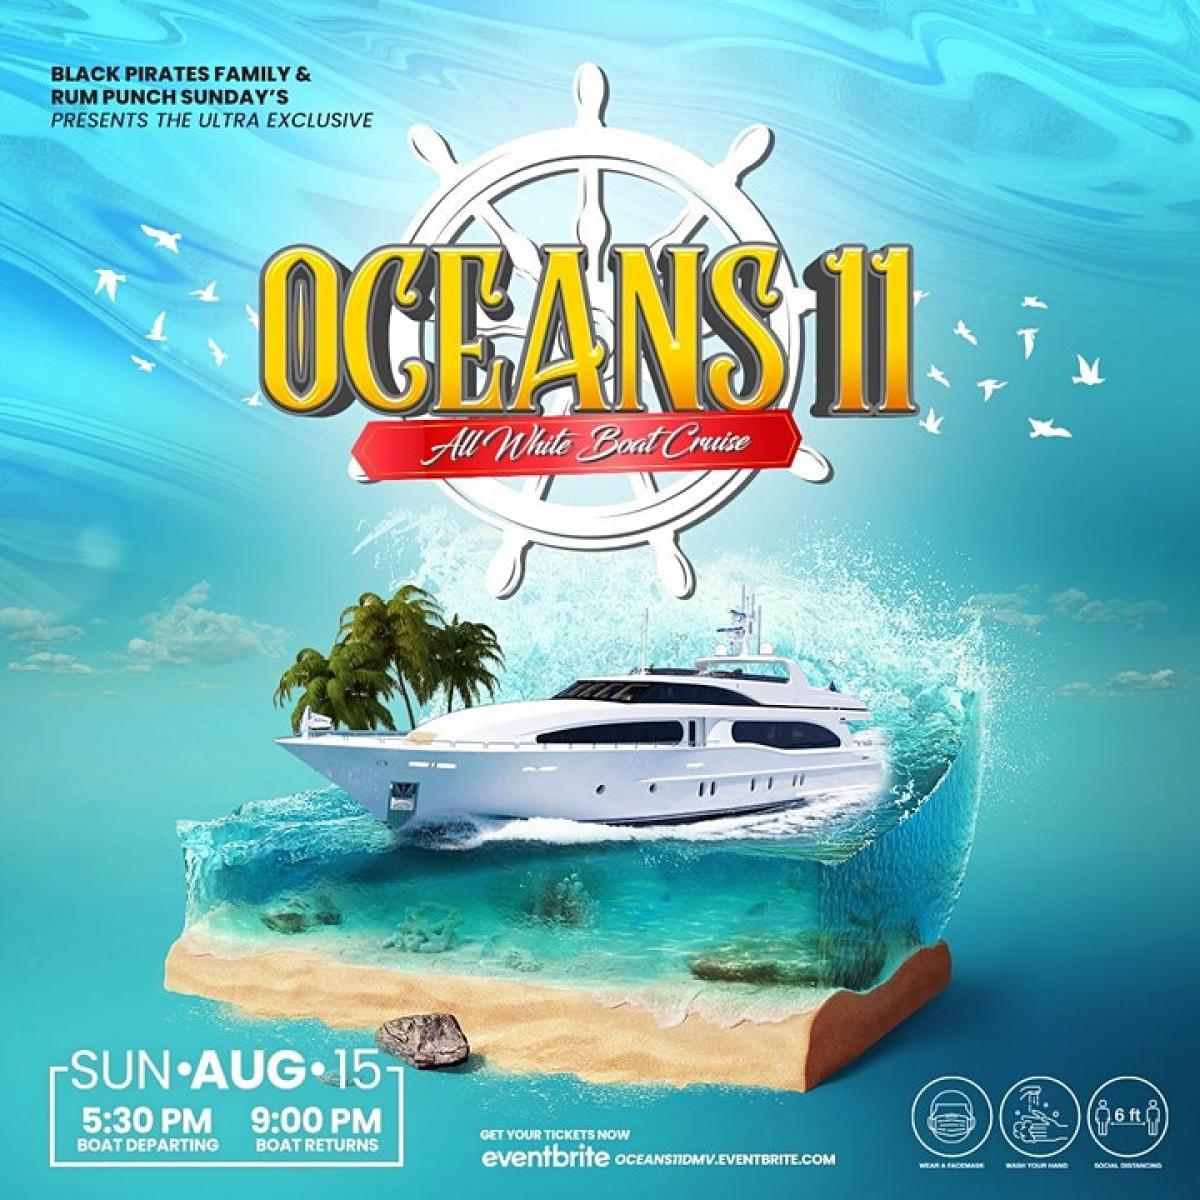 Oceans 11 - All White Boat Cruise flyer or graphic.